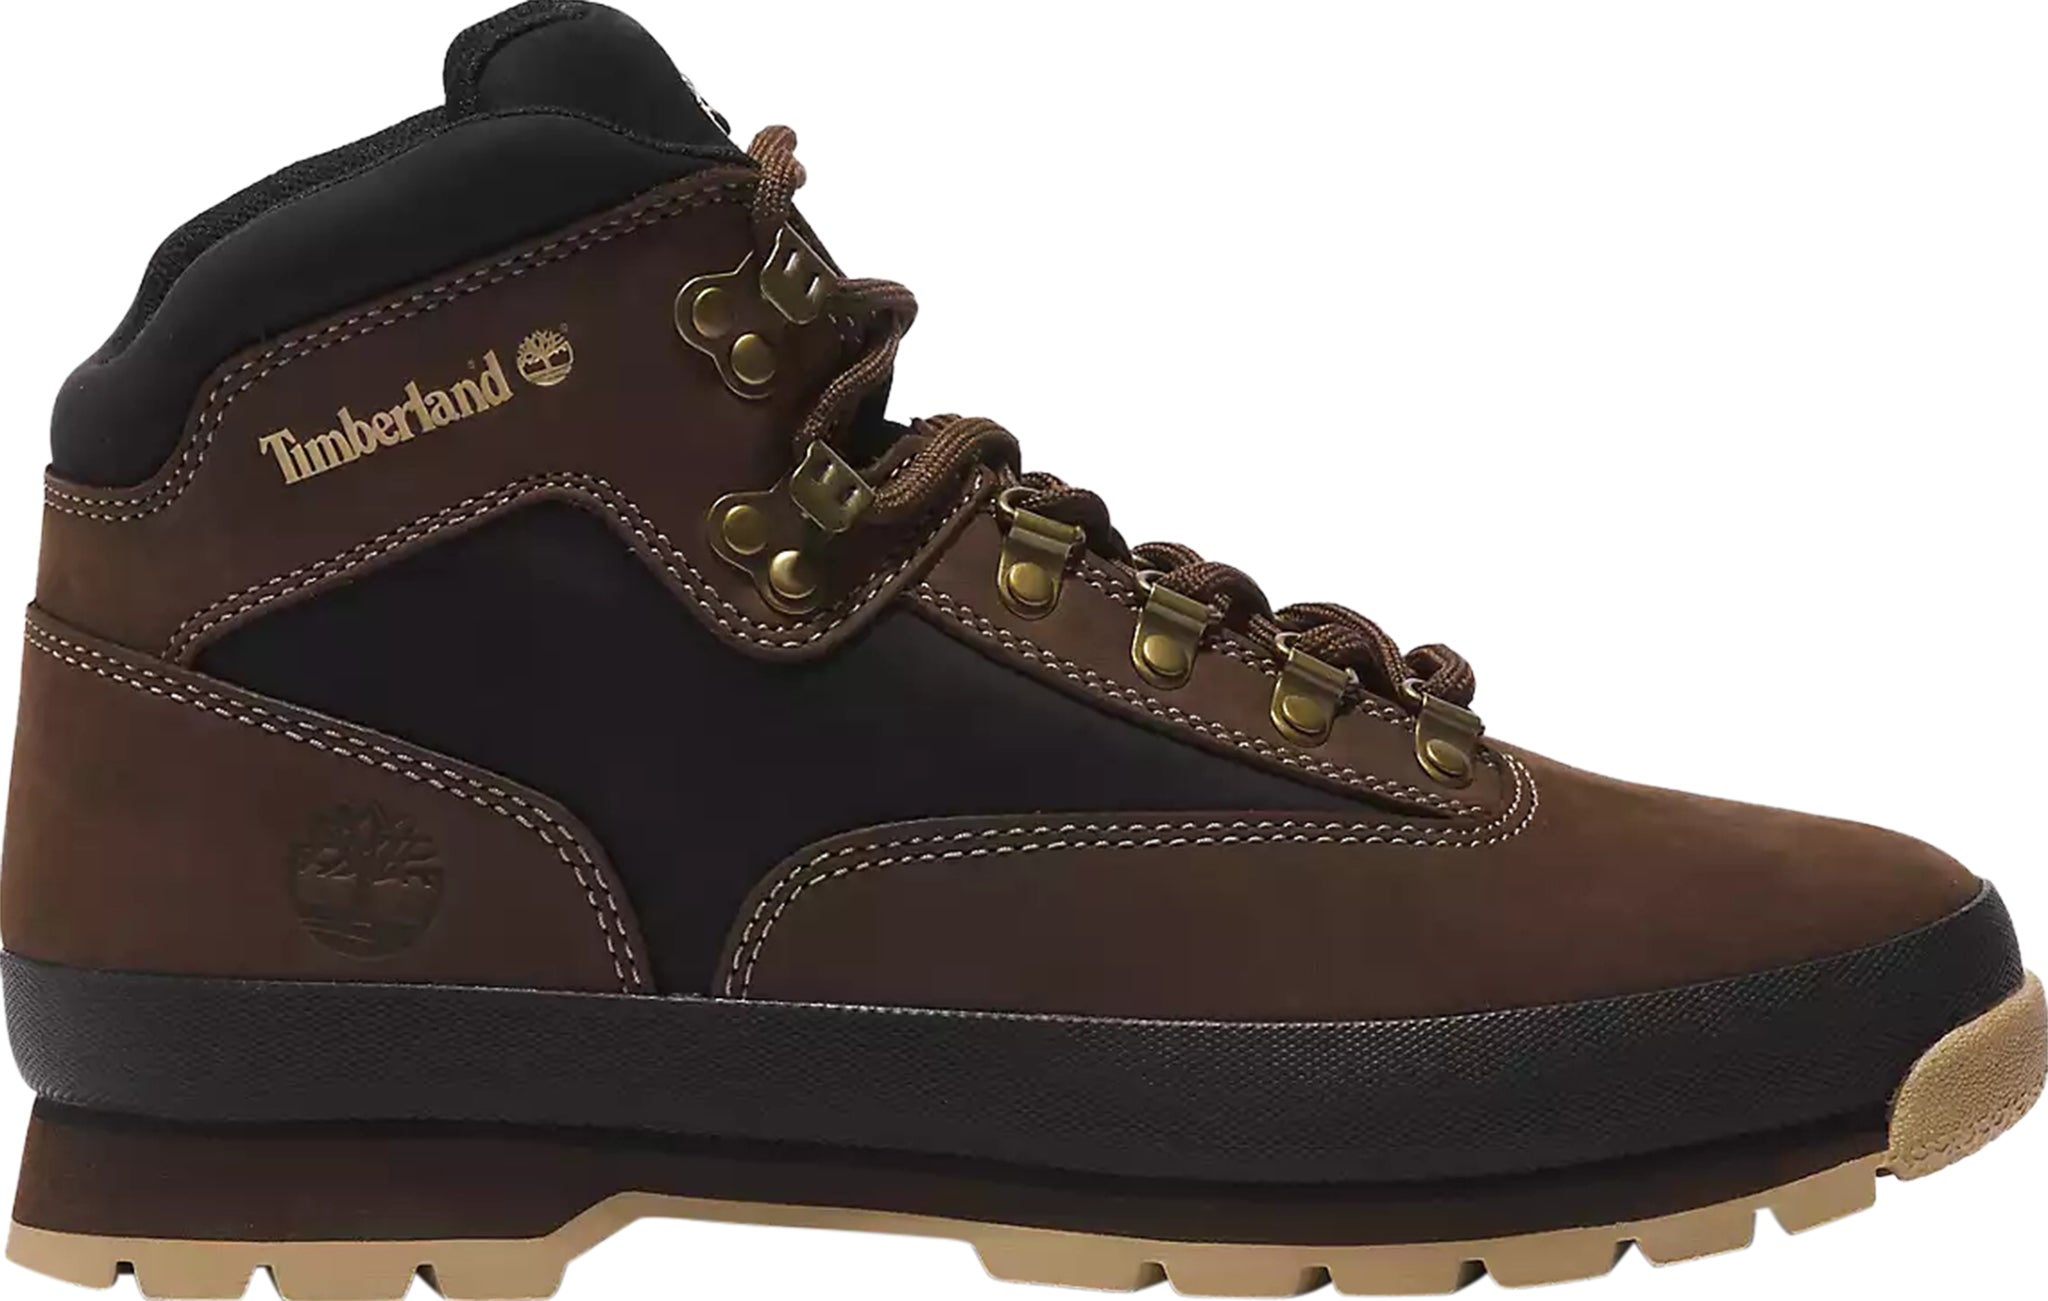 Timberland Euro Hiker Leather Boots - Men's | Altitude Sports